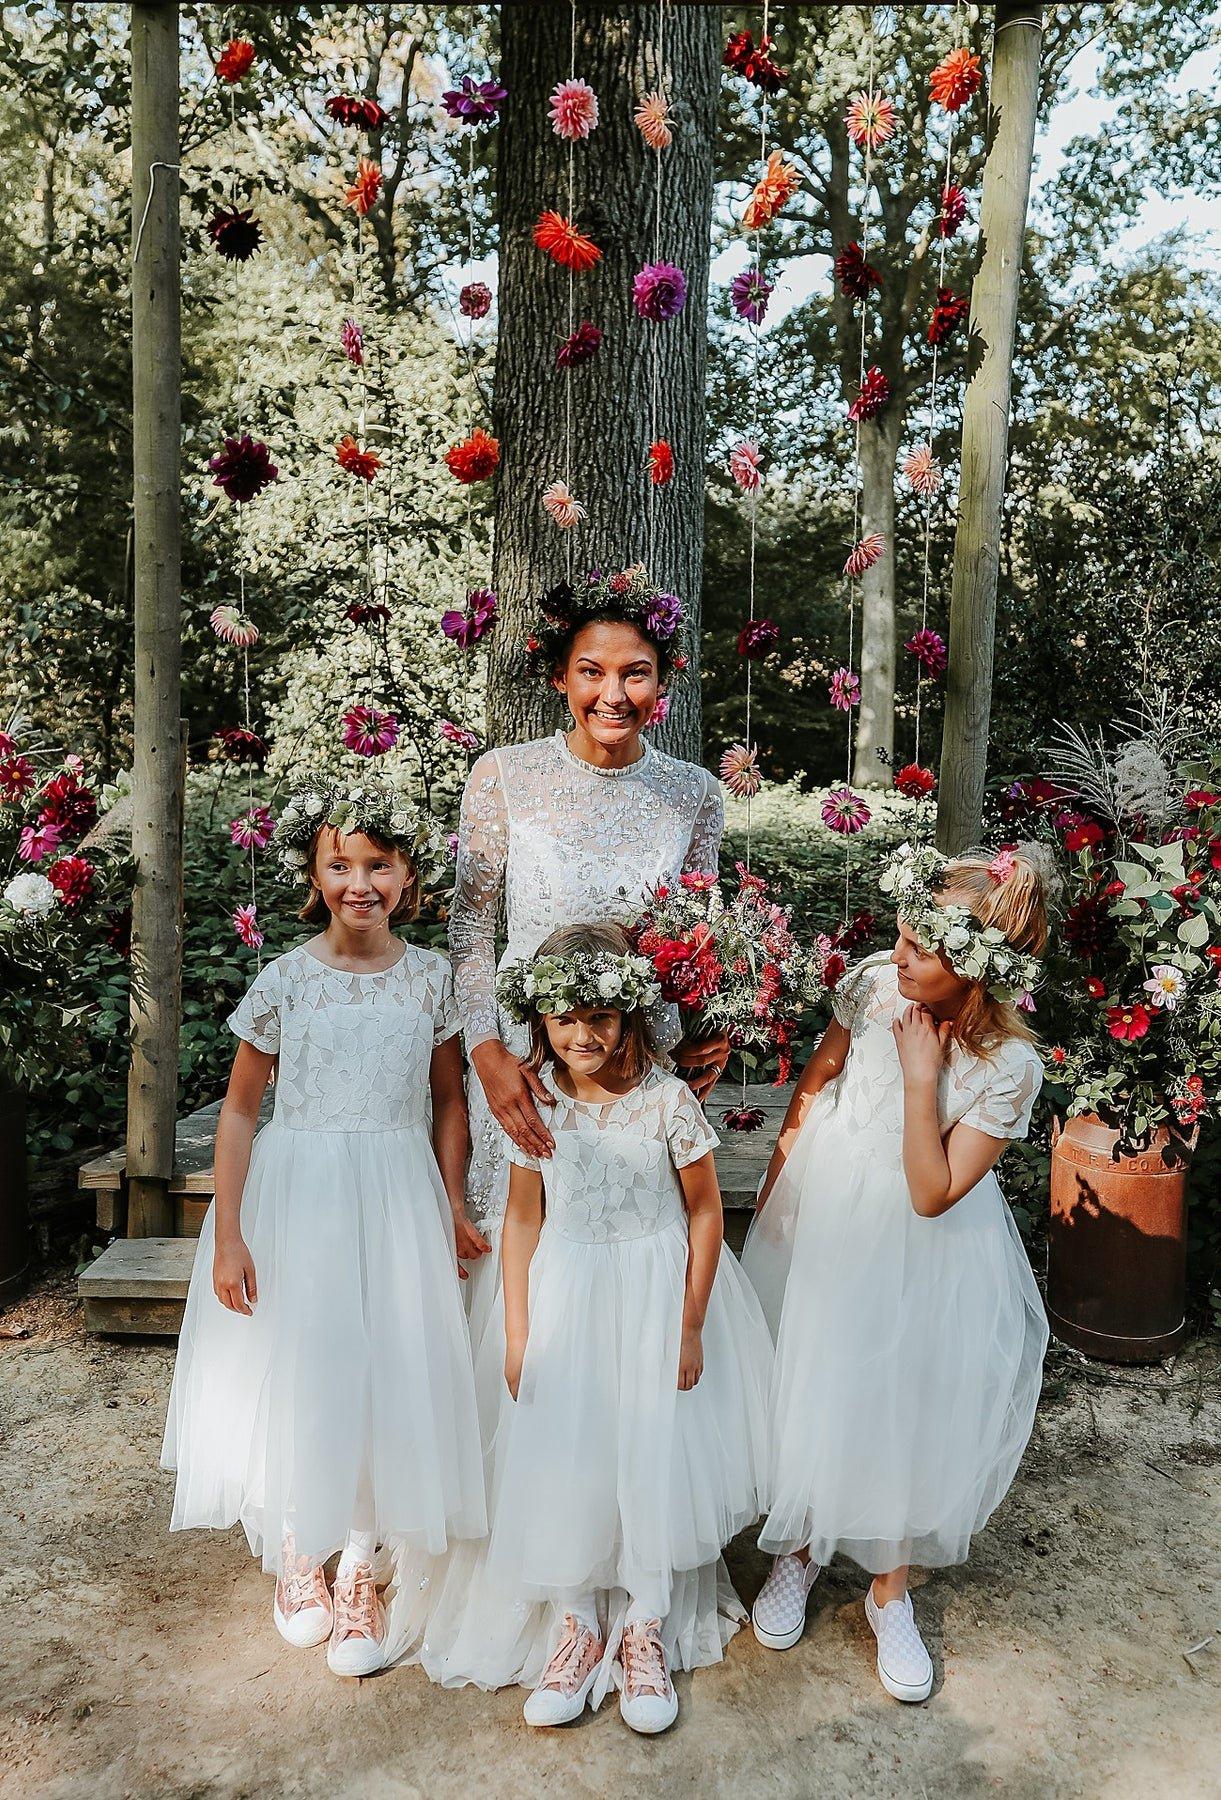 The Best-Dressed Flower Girls from Real Weddings